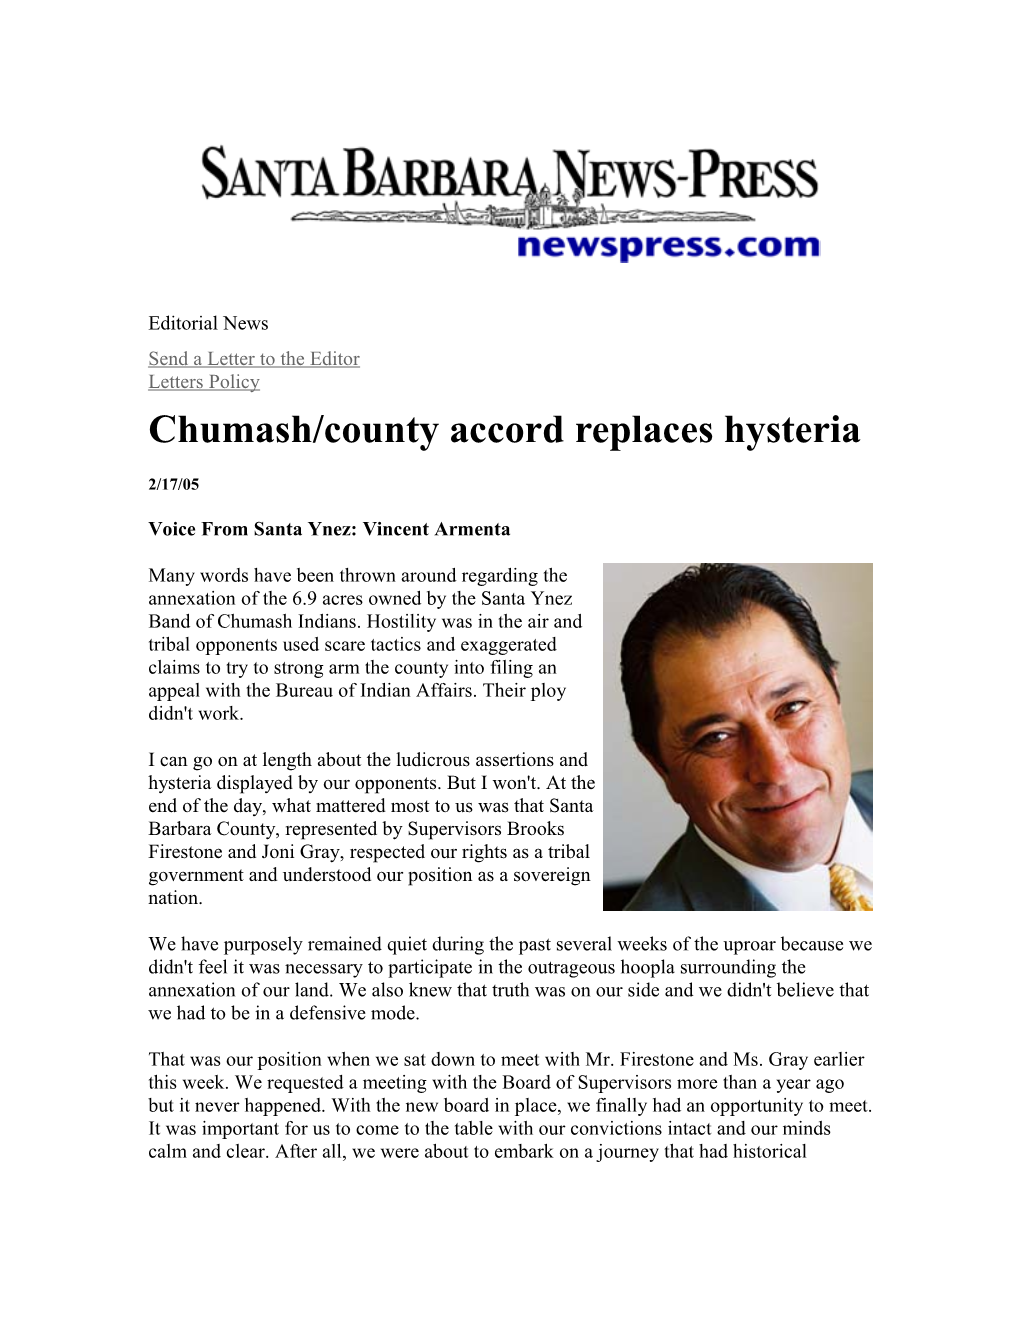 Chumash/County Accord Replaces Hysteria